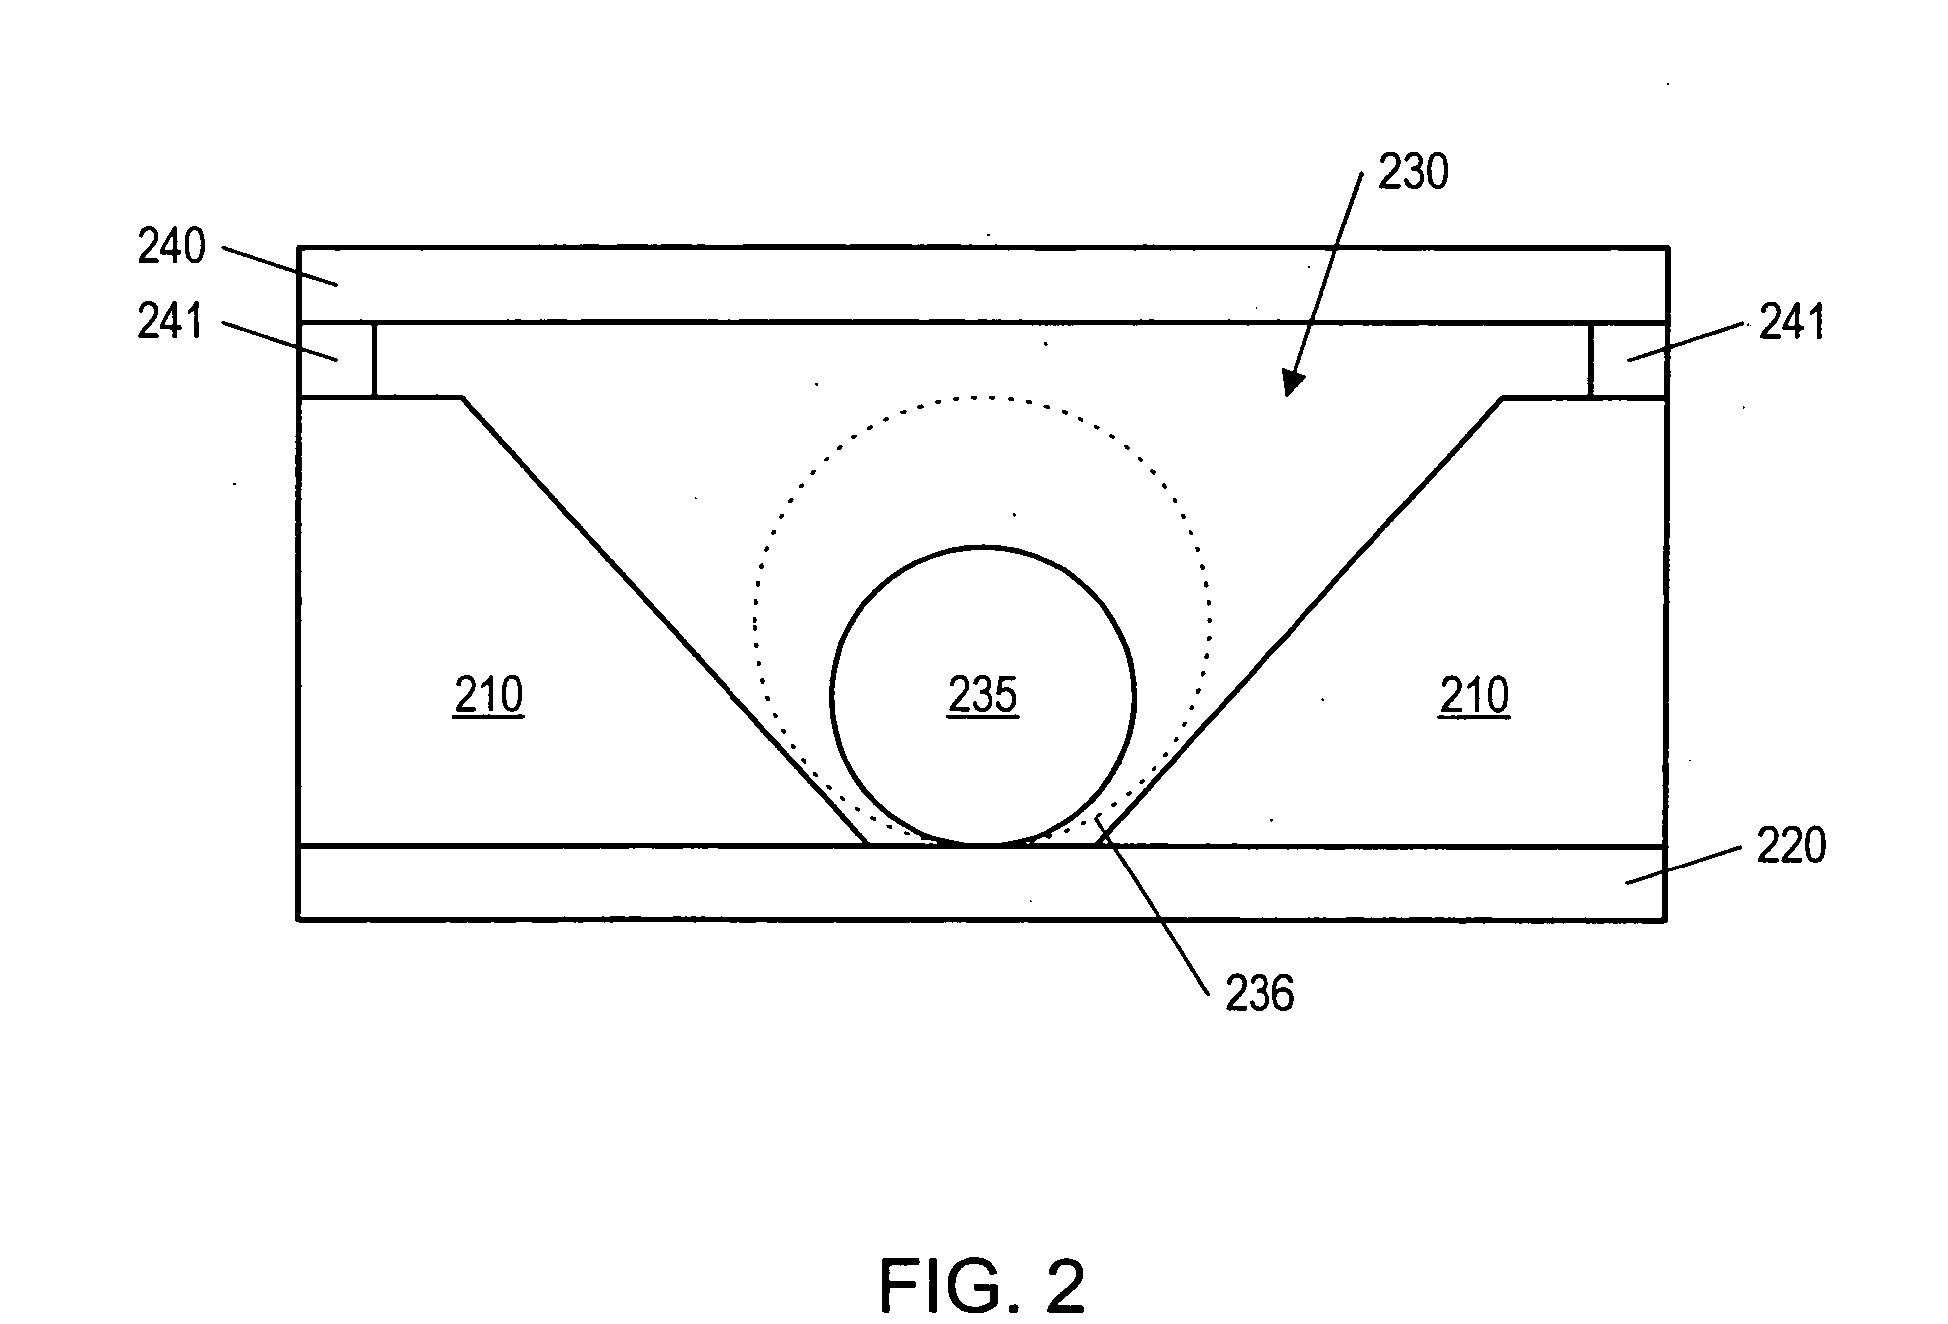 Fluid based analysis of multiple analytes by a sensor array